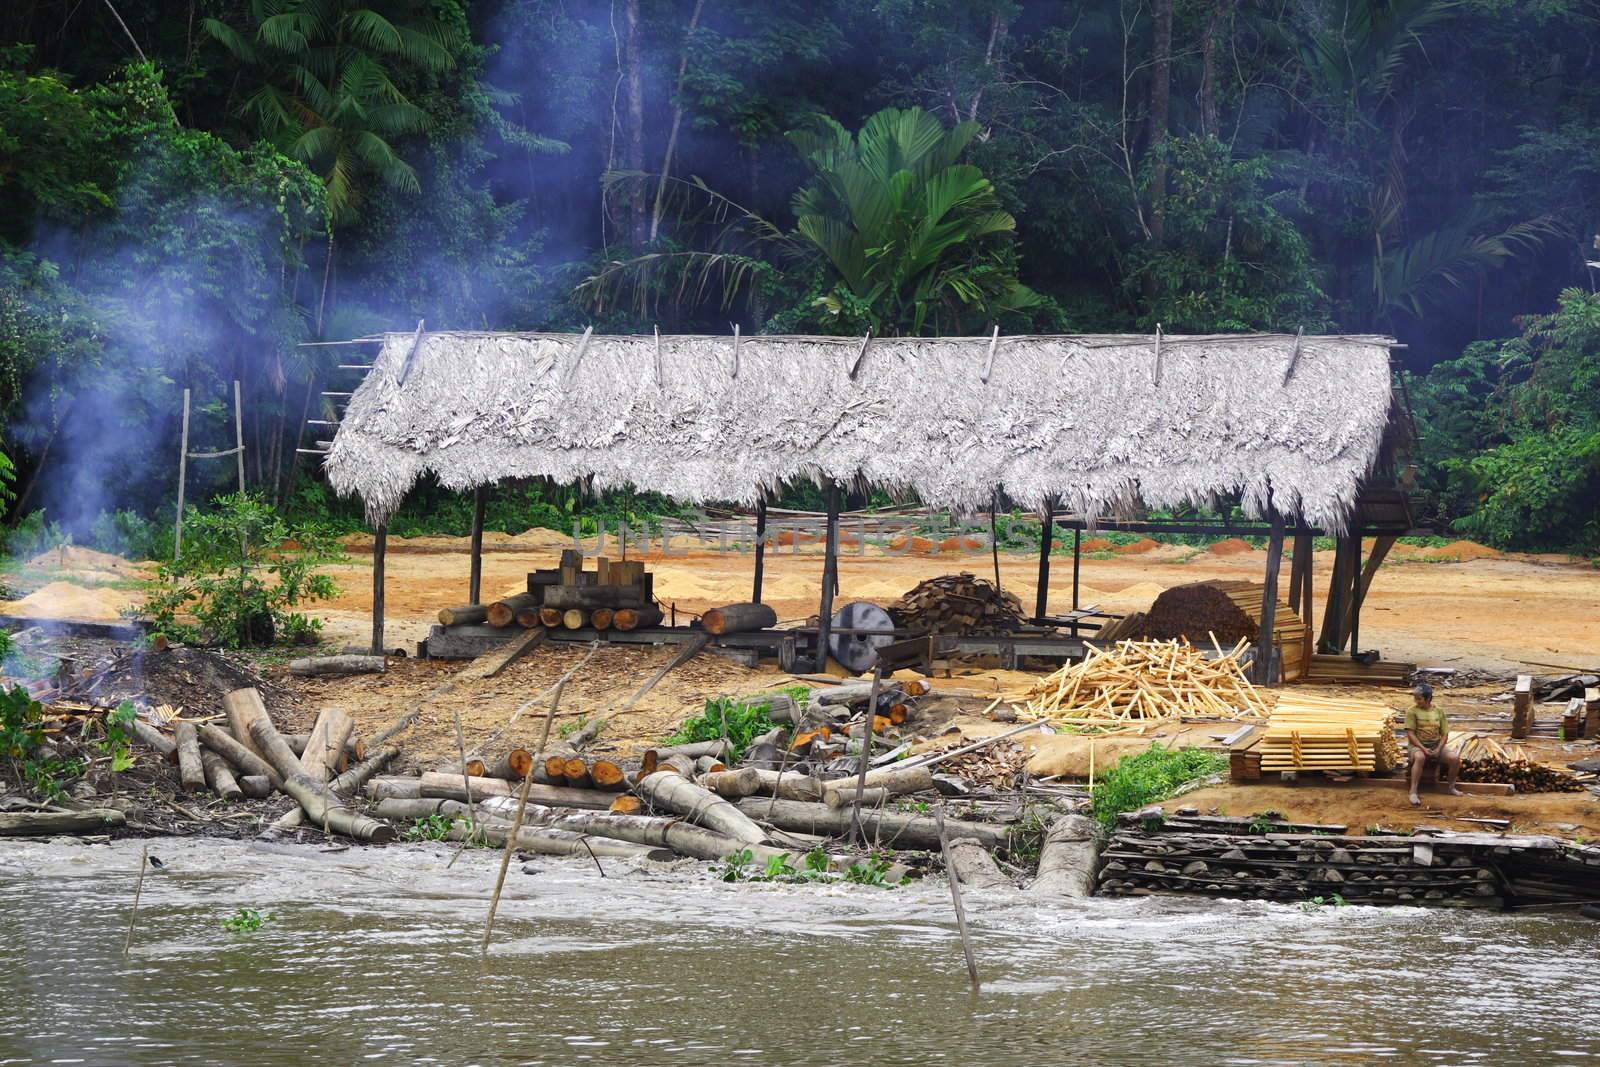 This hut was found on the edge of the Amazon river and is used as a storage and processing place for cutting down the trees!